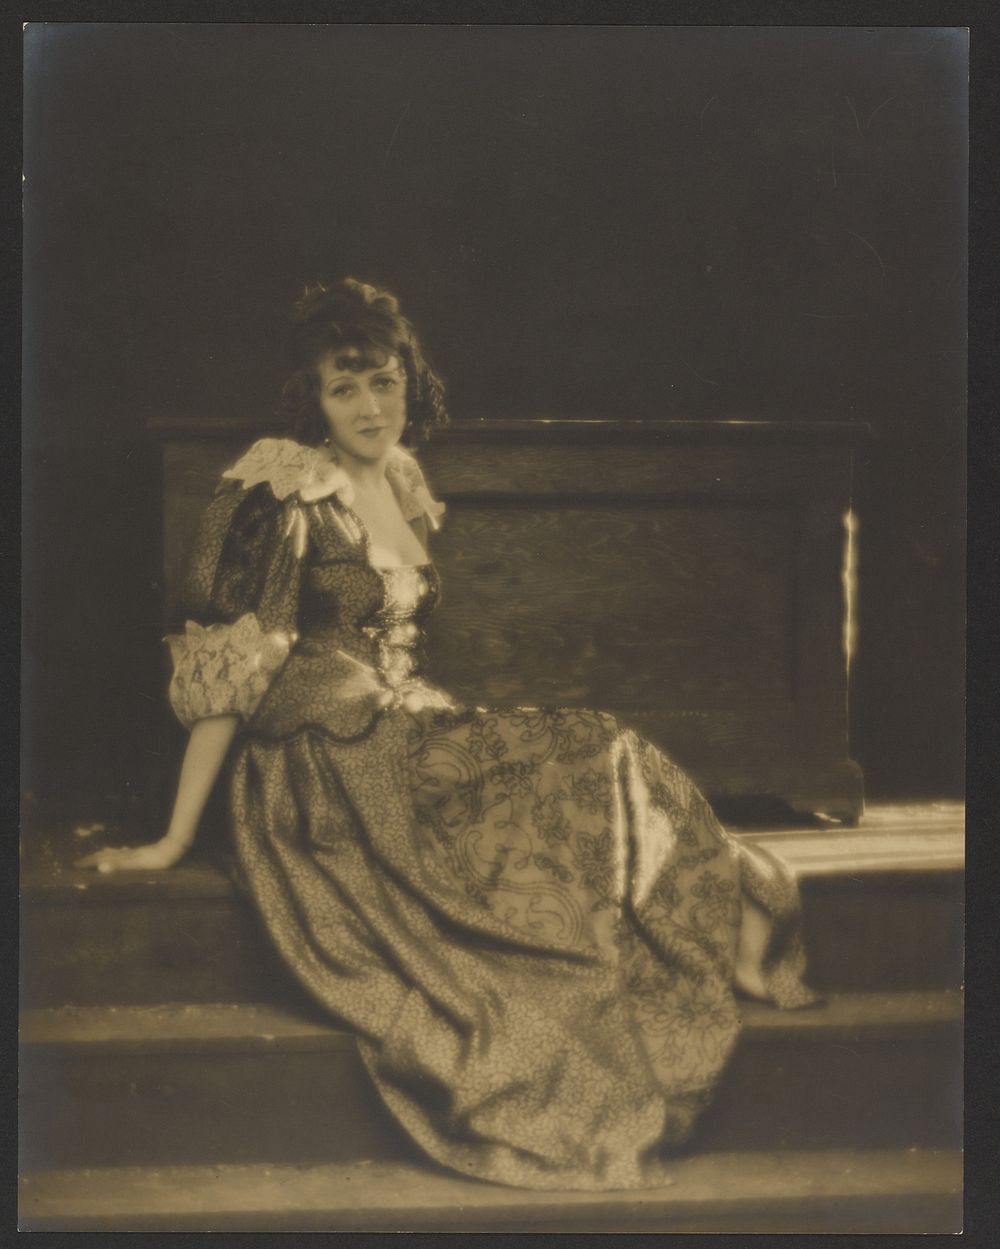 Barbara La Marr in Peasant Costume Seated on Stage Step with Large Wooden Box Behind Her by Arthur F Kales